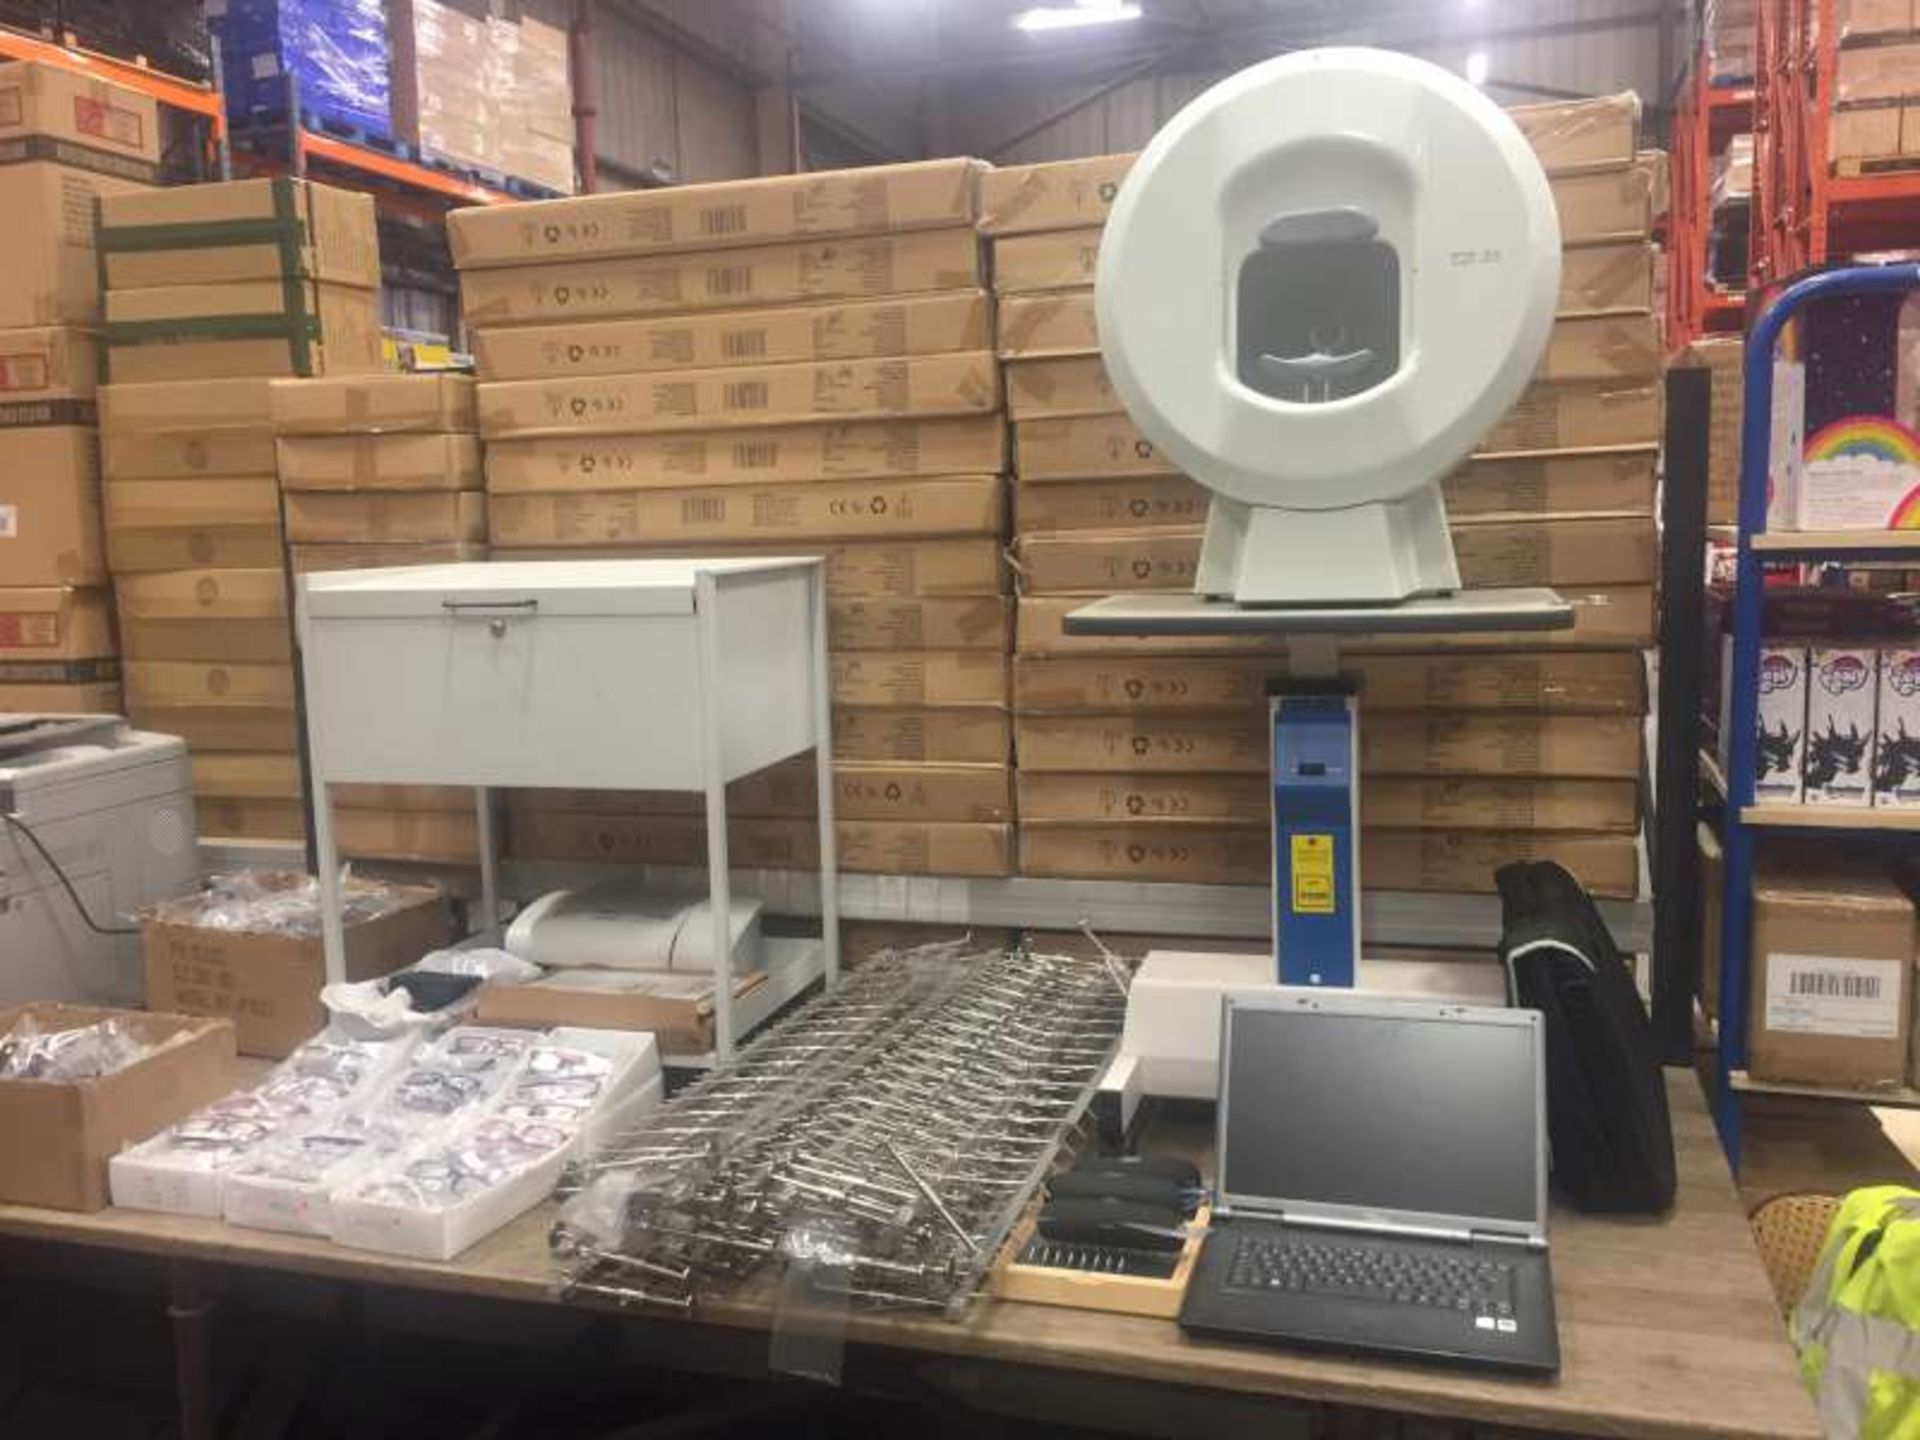 LOT CONTAINING PTS 910 SERIES AUTOMATED PERIMETER ON STAND, LOCKABLE MOBILE STAND, PRINTER, RACKING,